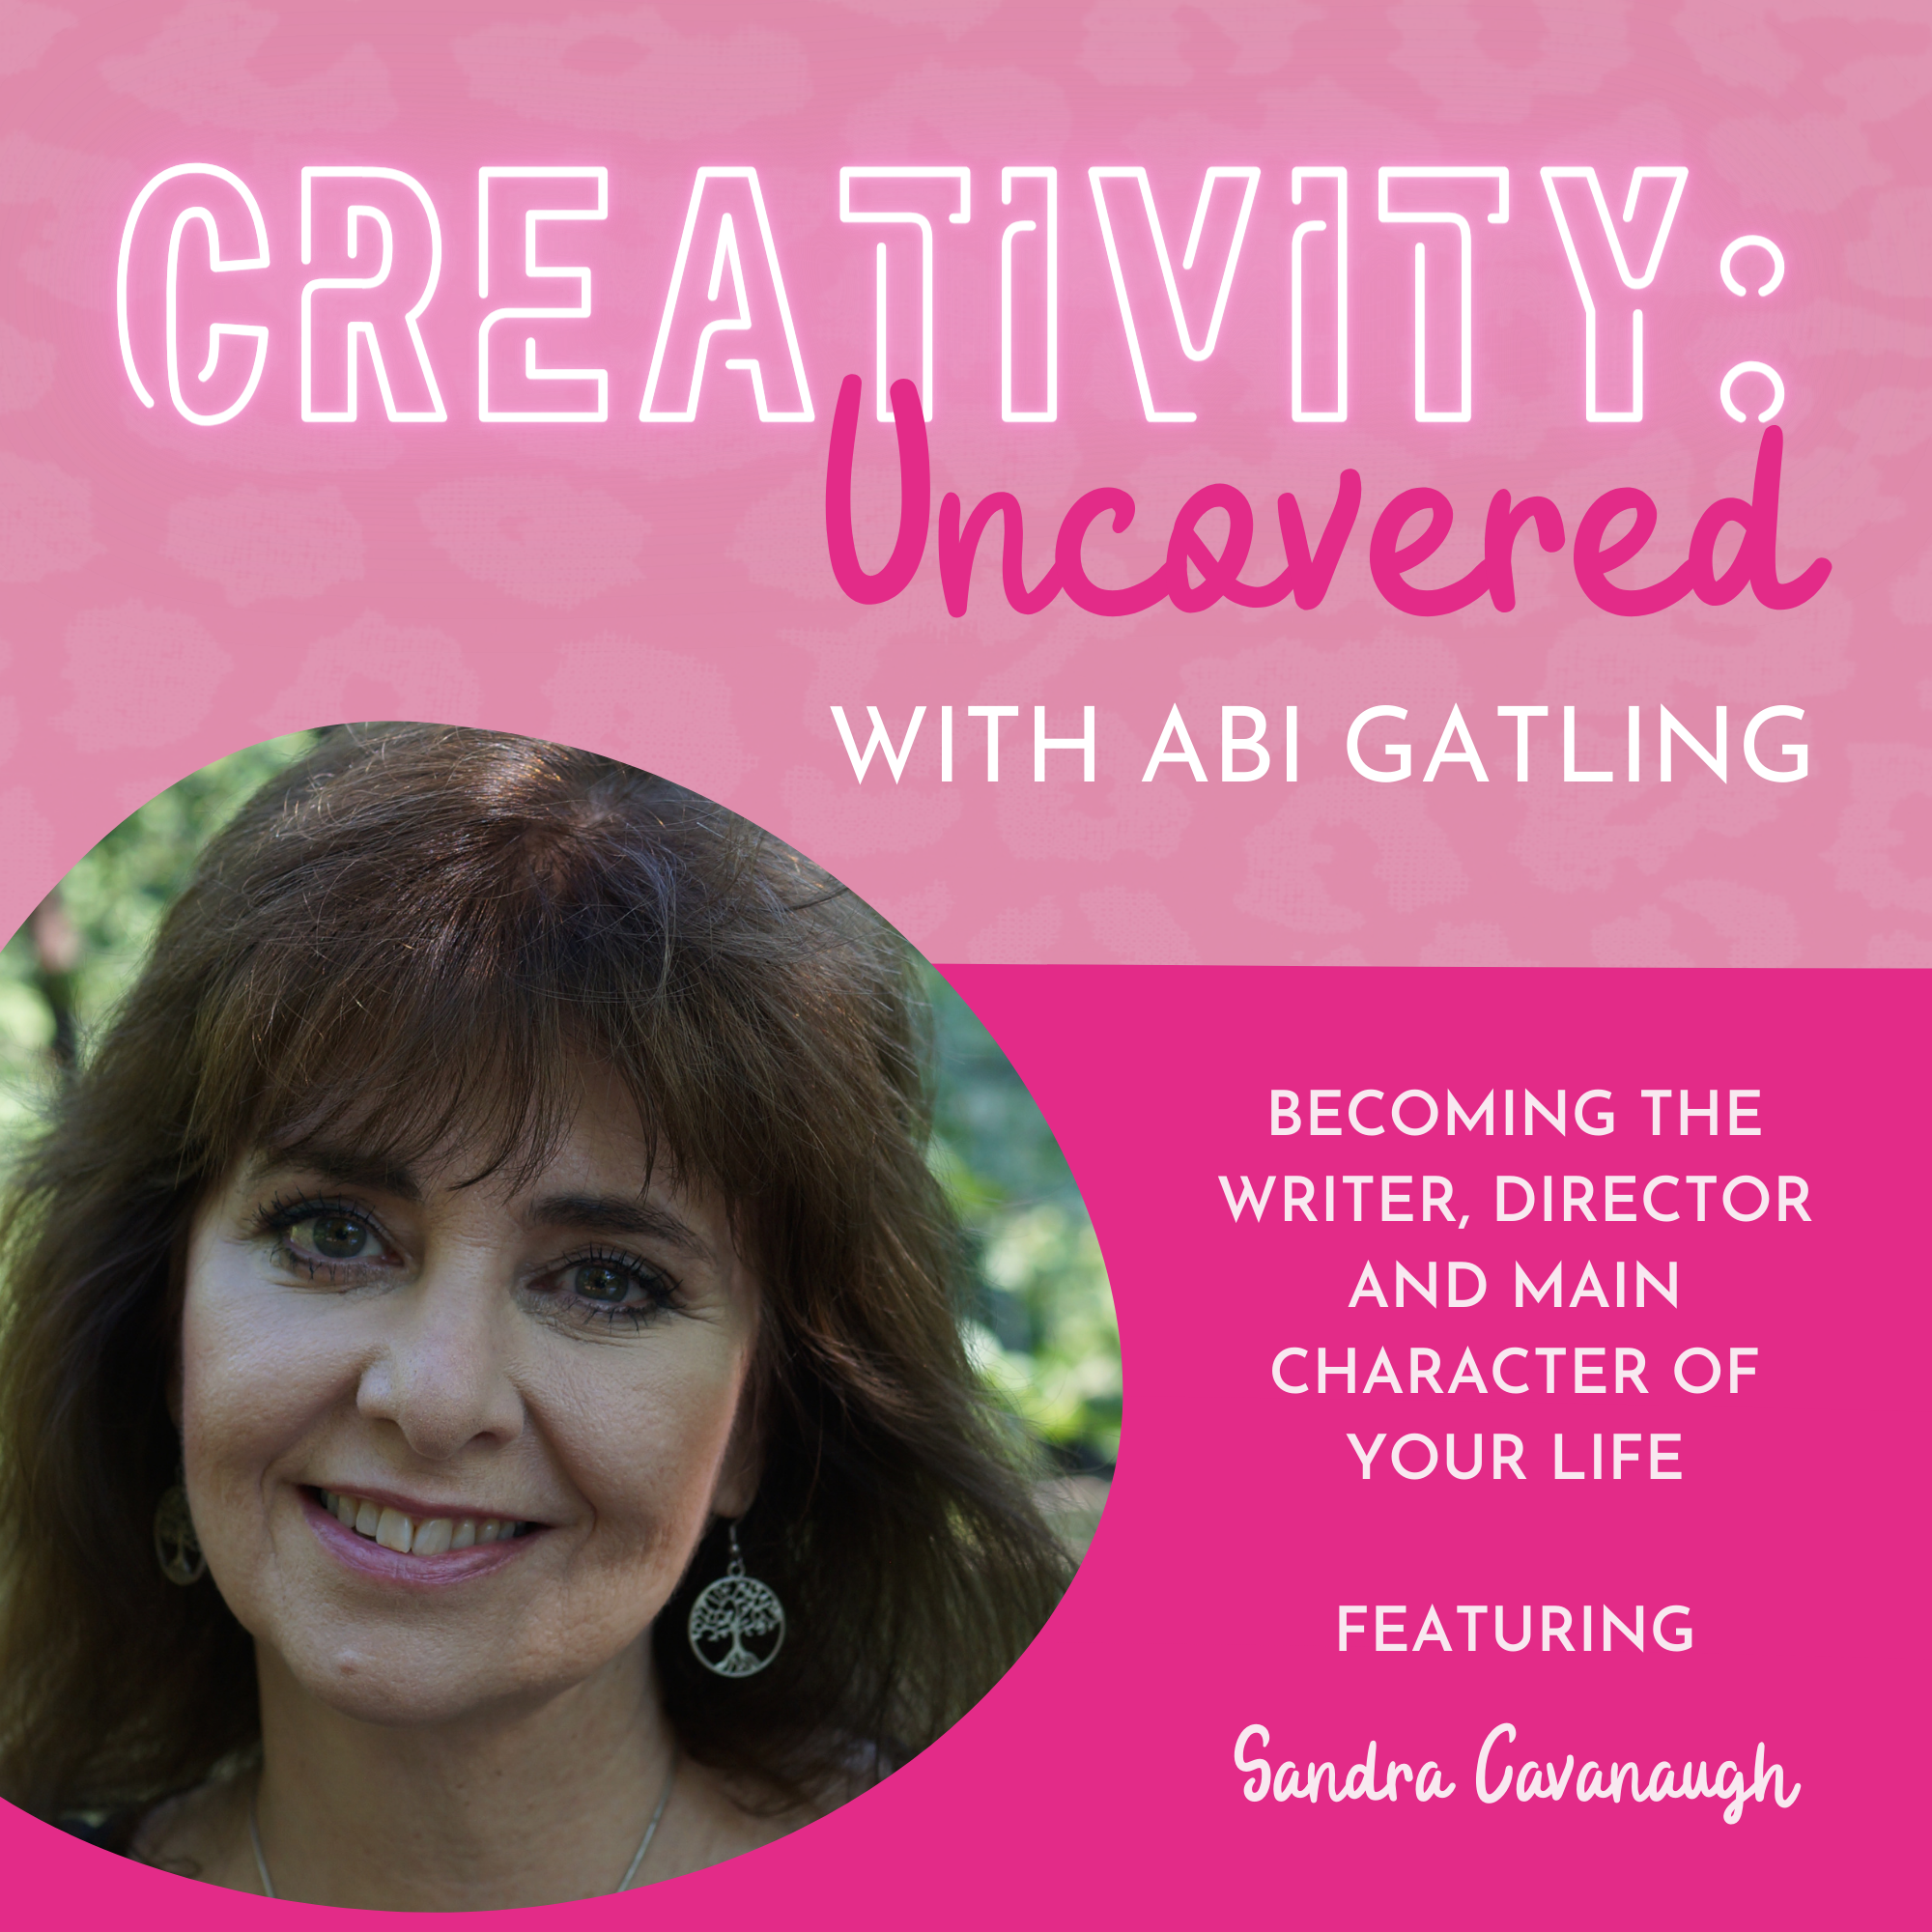 Creativity: Uncovered podcast episode graphic featuring guest Sandra Cavanaugh